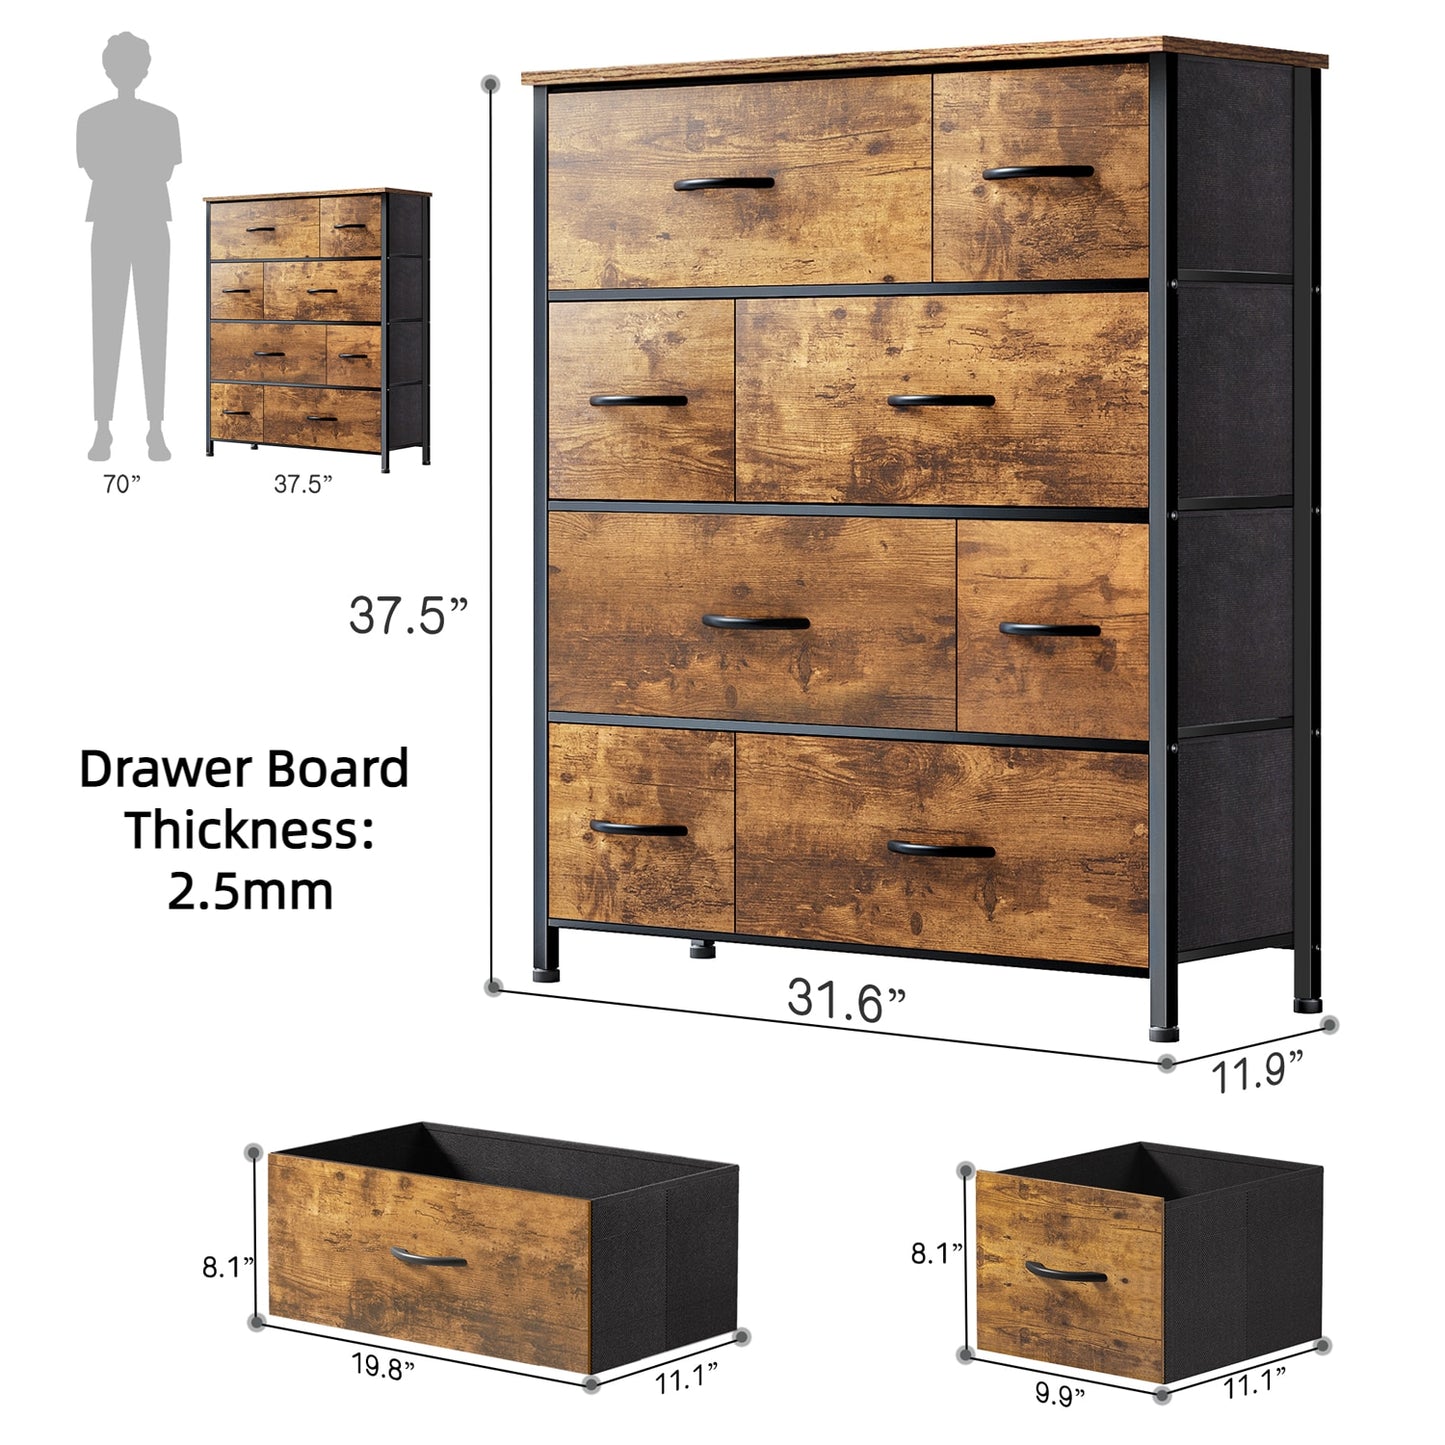 EnHomee Bedroom Dresser with 3 5 7 8 9 12 16 Fabric Drawers Chest Dresser Furniture Large Capacity Wooden Top Bedroom Closets